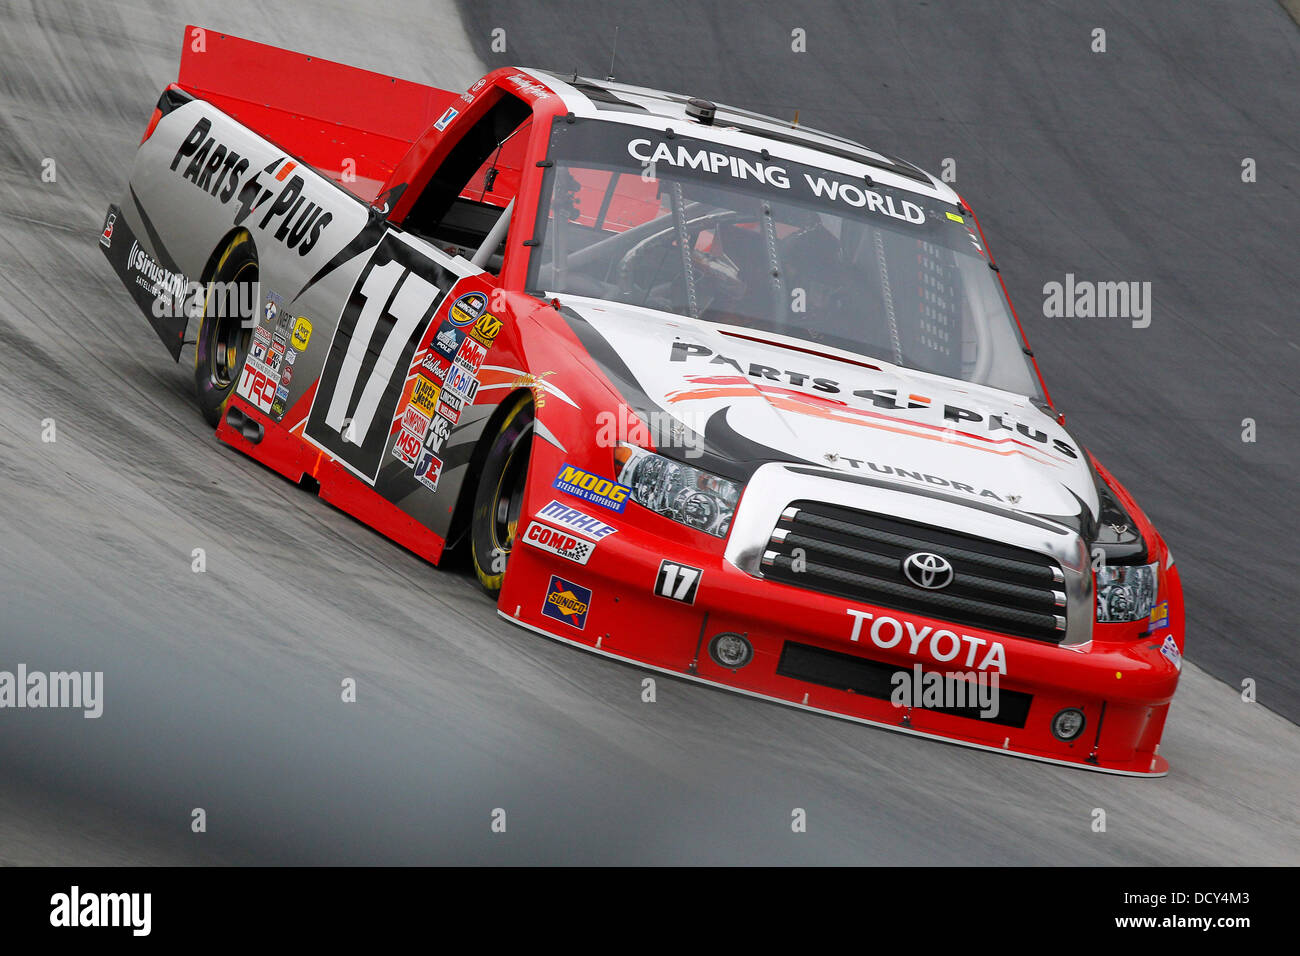 Bristol, TN, USA. 21st Aug, 2013. Bristol, TN - Aug 21, 2013: Timothy Peters (17) brings his Camping World Truck through the turns during a practice session for the UNOH 200 race at the Bristol Motor Speedway in Bristol, TN. Credit:  csm/Alamy Live News Stock Photo